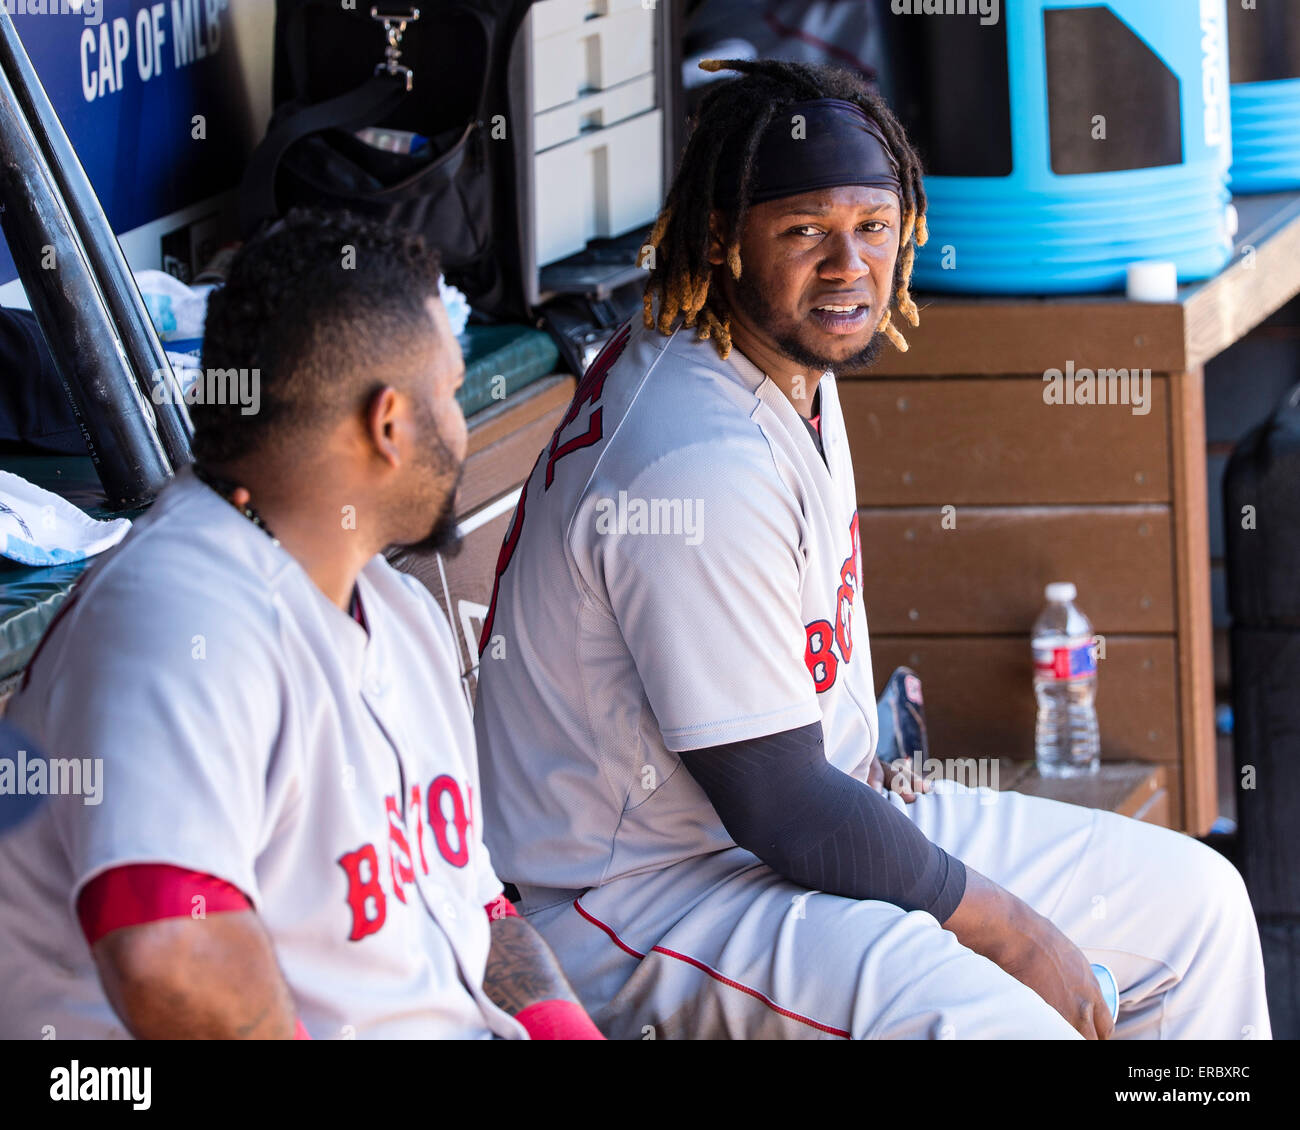 Arlington, TX, USA. 31st May, 2015. Boston Red Sox left fielder Hanley Ramirez (13) talks with Boston Red Sox third baseman Pablo Sandoval (48) on the bench during the the Major League Baseball game between the Boston Red Sox and the Texas Rangers at Globe Life Park in Arlington, TX. The Rangers defeated the Red Sox 4-3. Tim Warner/CSM/Alamy Live News Stock Photo